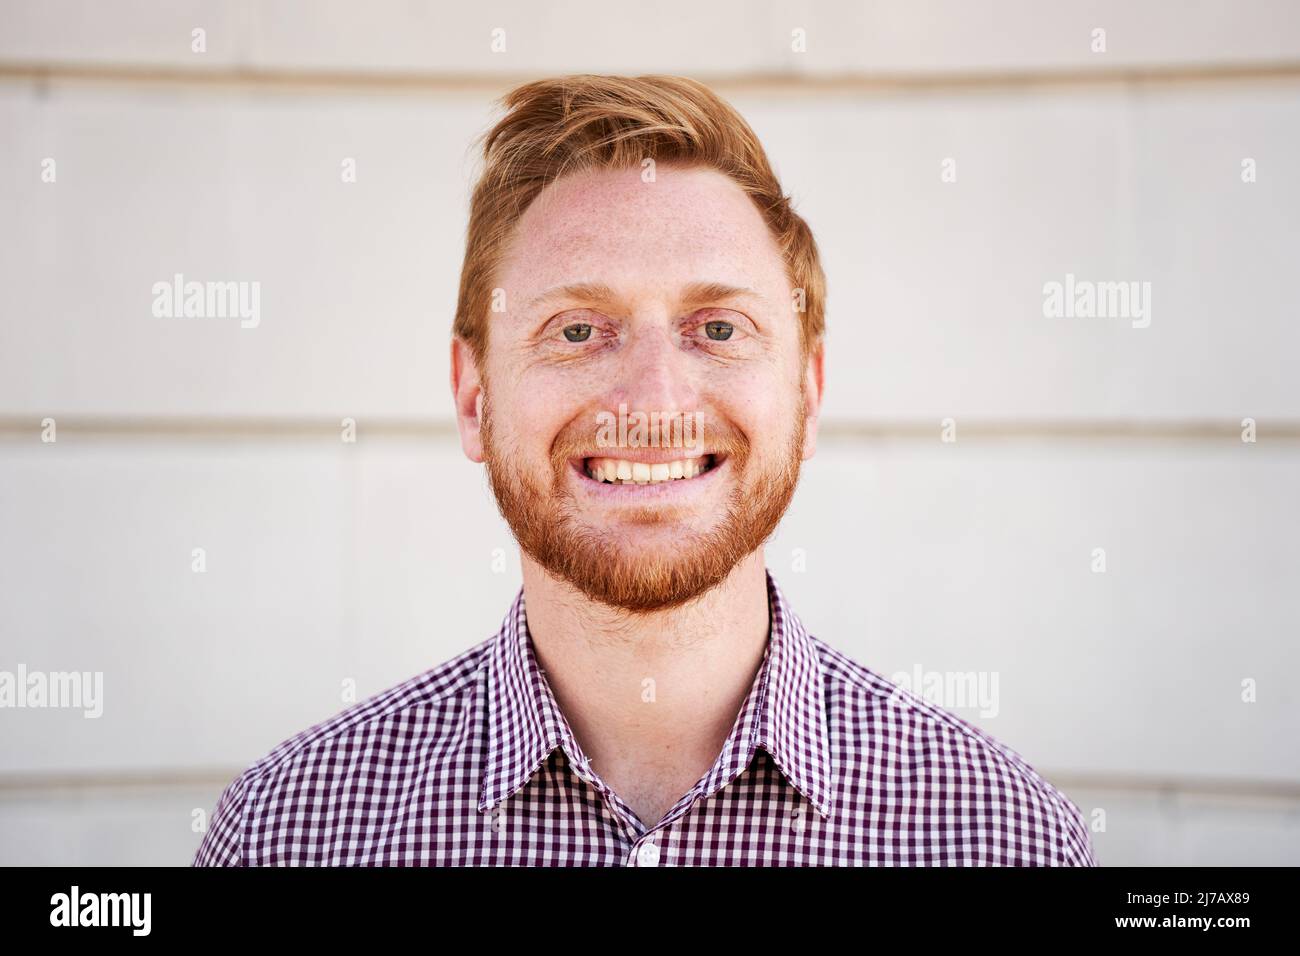 Outdoor portrait of a smiling Red hair guy looking at the camera laughing with positive face and friendly look. Close up of a Happy human face - Stock Photo